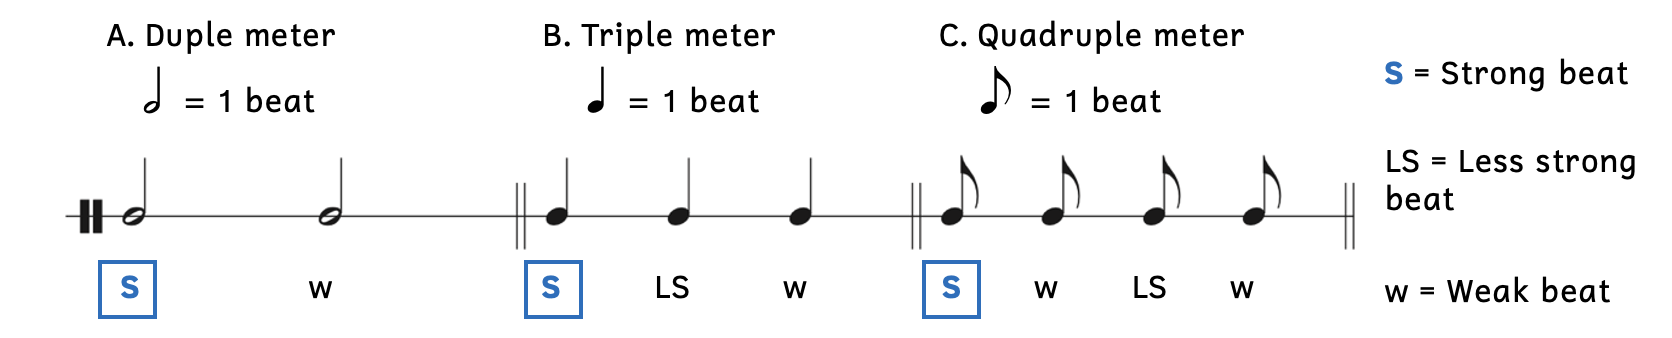 Weighted beats in simple meters. A. In duple meters, the downbeat is strong and beat 2 is weak. B. In triple meters, the downbeat is strongest; beat 2 is less strong; and beat 3 is weak. C. In quadruple meters, the downbeat is strongest; beat 3 is less strong; and beats 2 and 4 are weak.